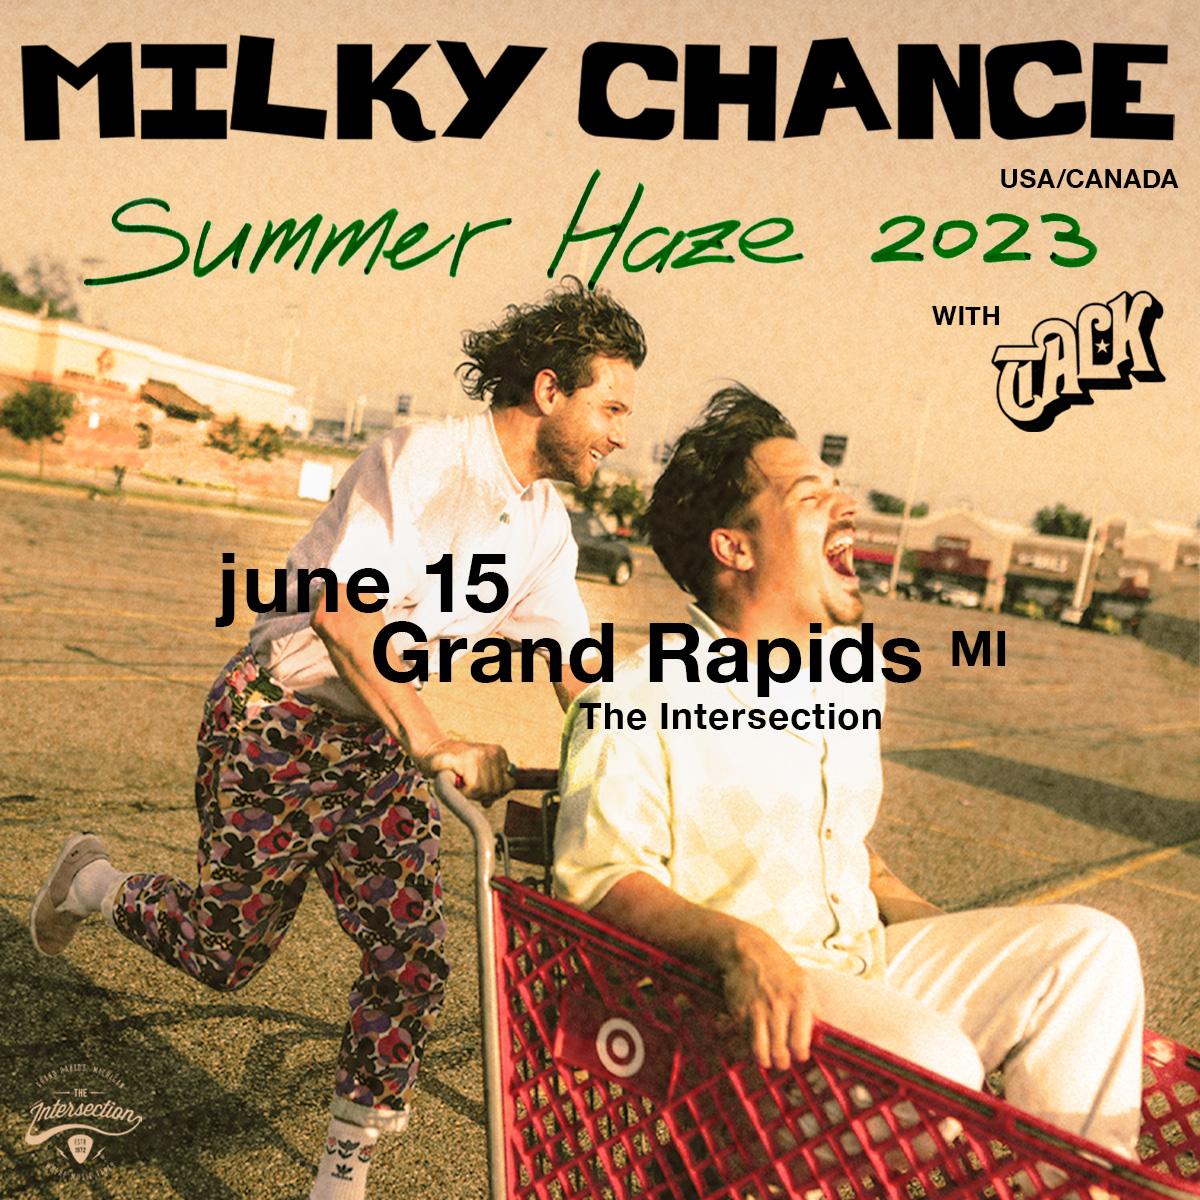 Milky Chance Summer Haze Tour 2023 The Intersection